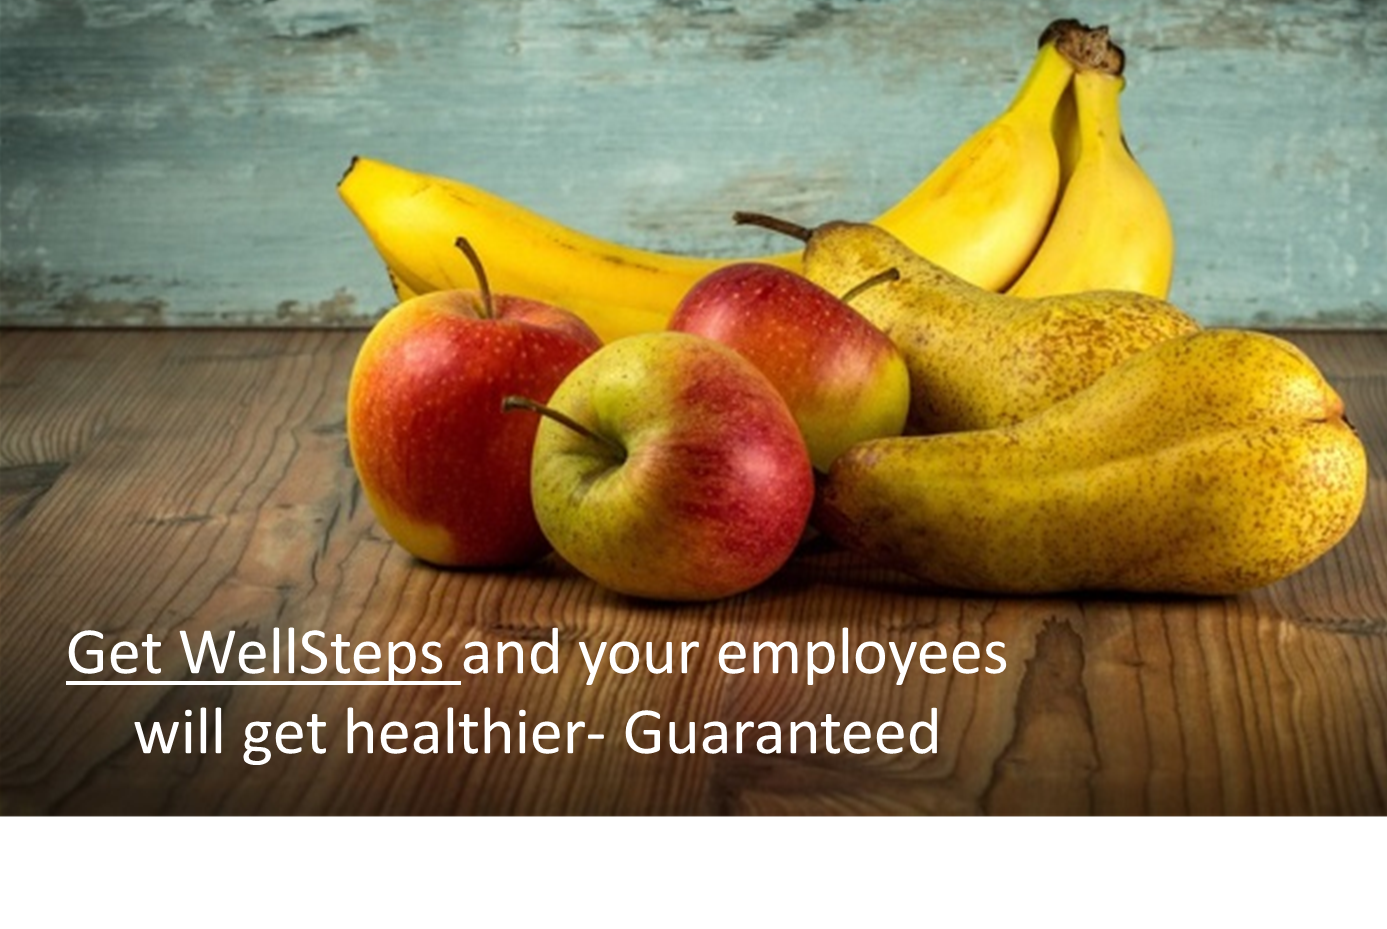 reasons to have a wellness program, benefits of employee wellness programs, benefits of implementing a workplace wellness program, advantages and disadvantages of wellness programs, wellness program goals and objectives, benefits and liabilities of wellness programs